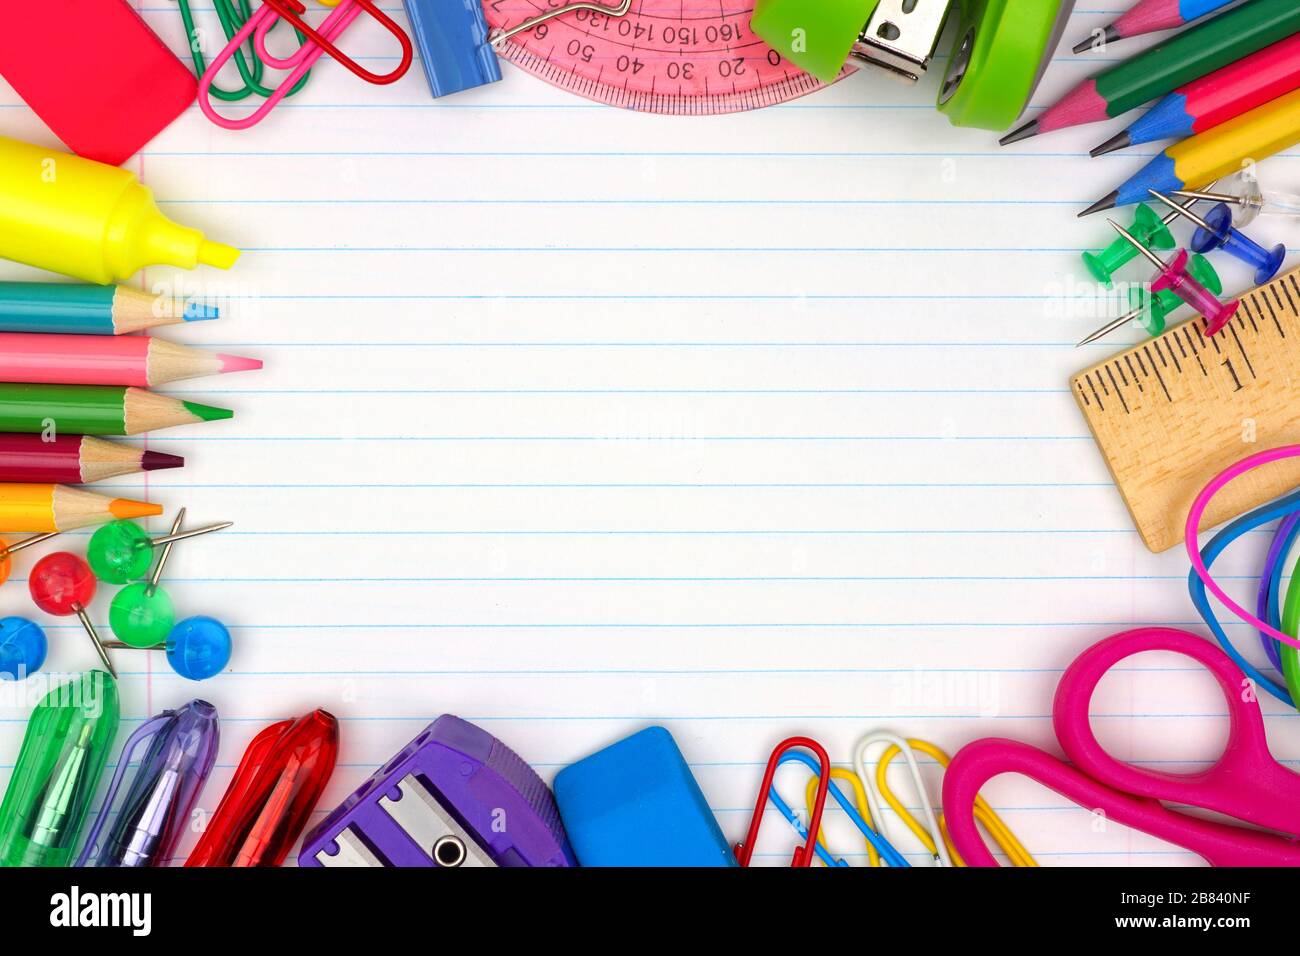 Colorful school supplies frame over a lined paper background Stock Photo